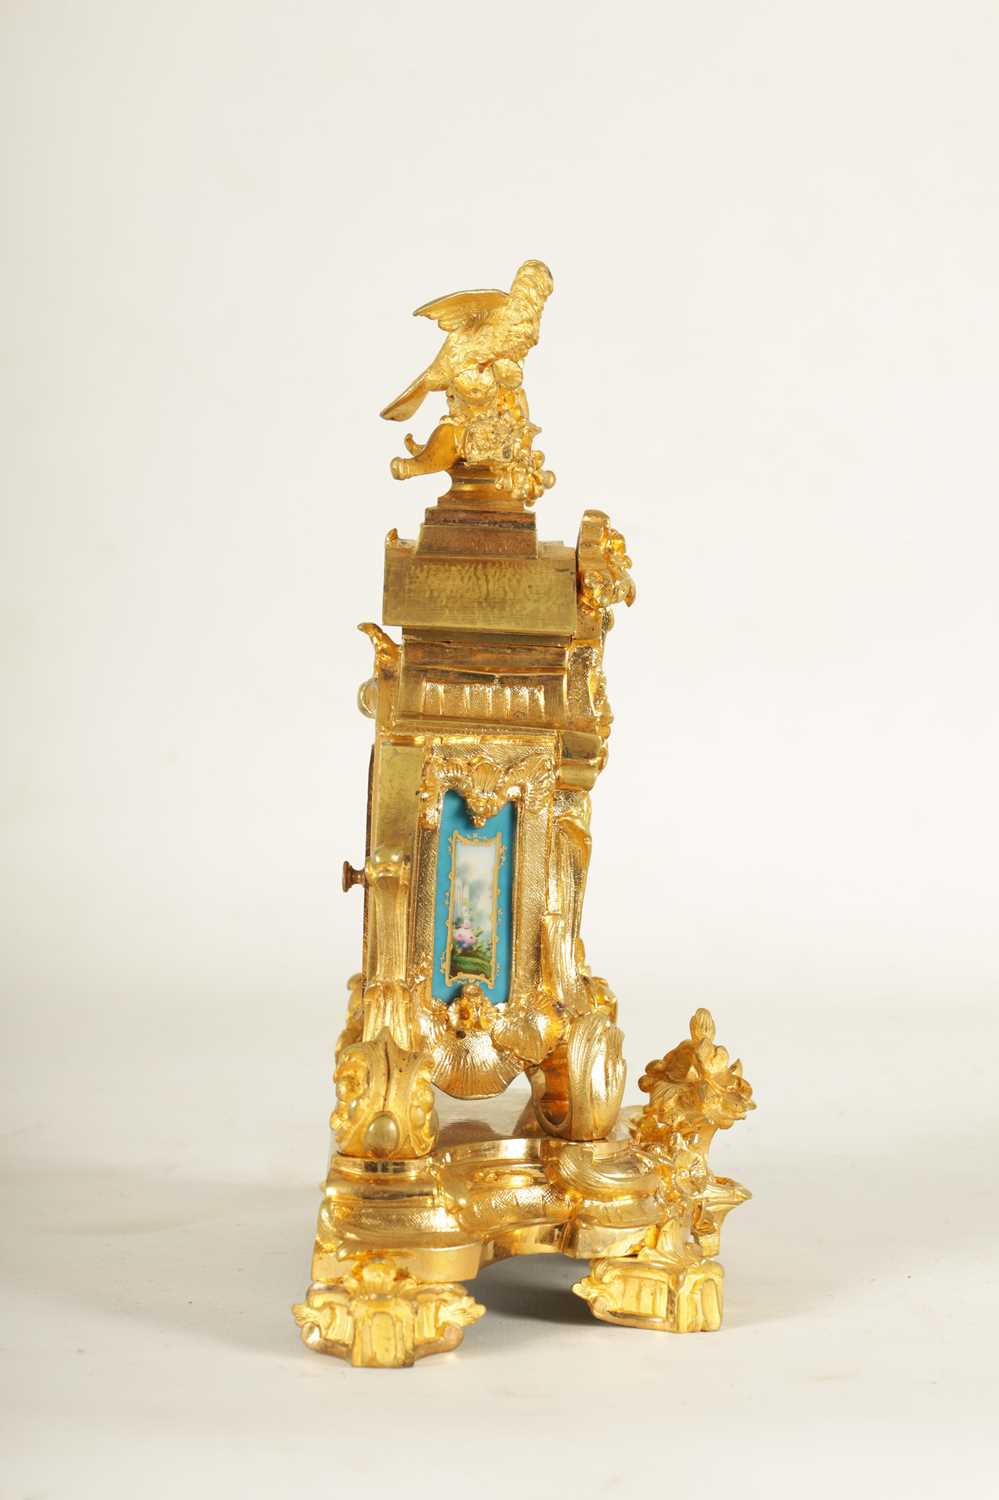 A SMALL LATE 19TH CENTURY FRENCH PORCELAIN PANELLED ORMOLU CARRIAGE STYLE MANTEL CLOCK - Image 12 of 13